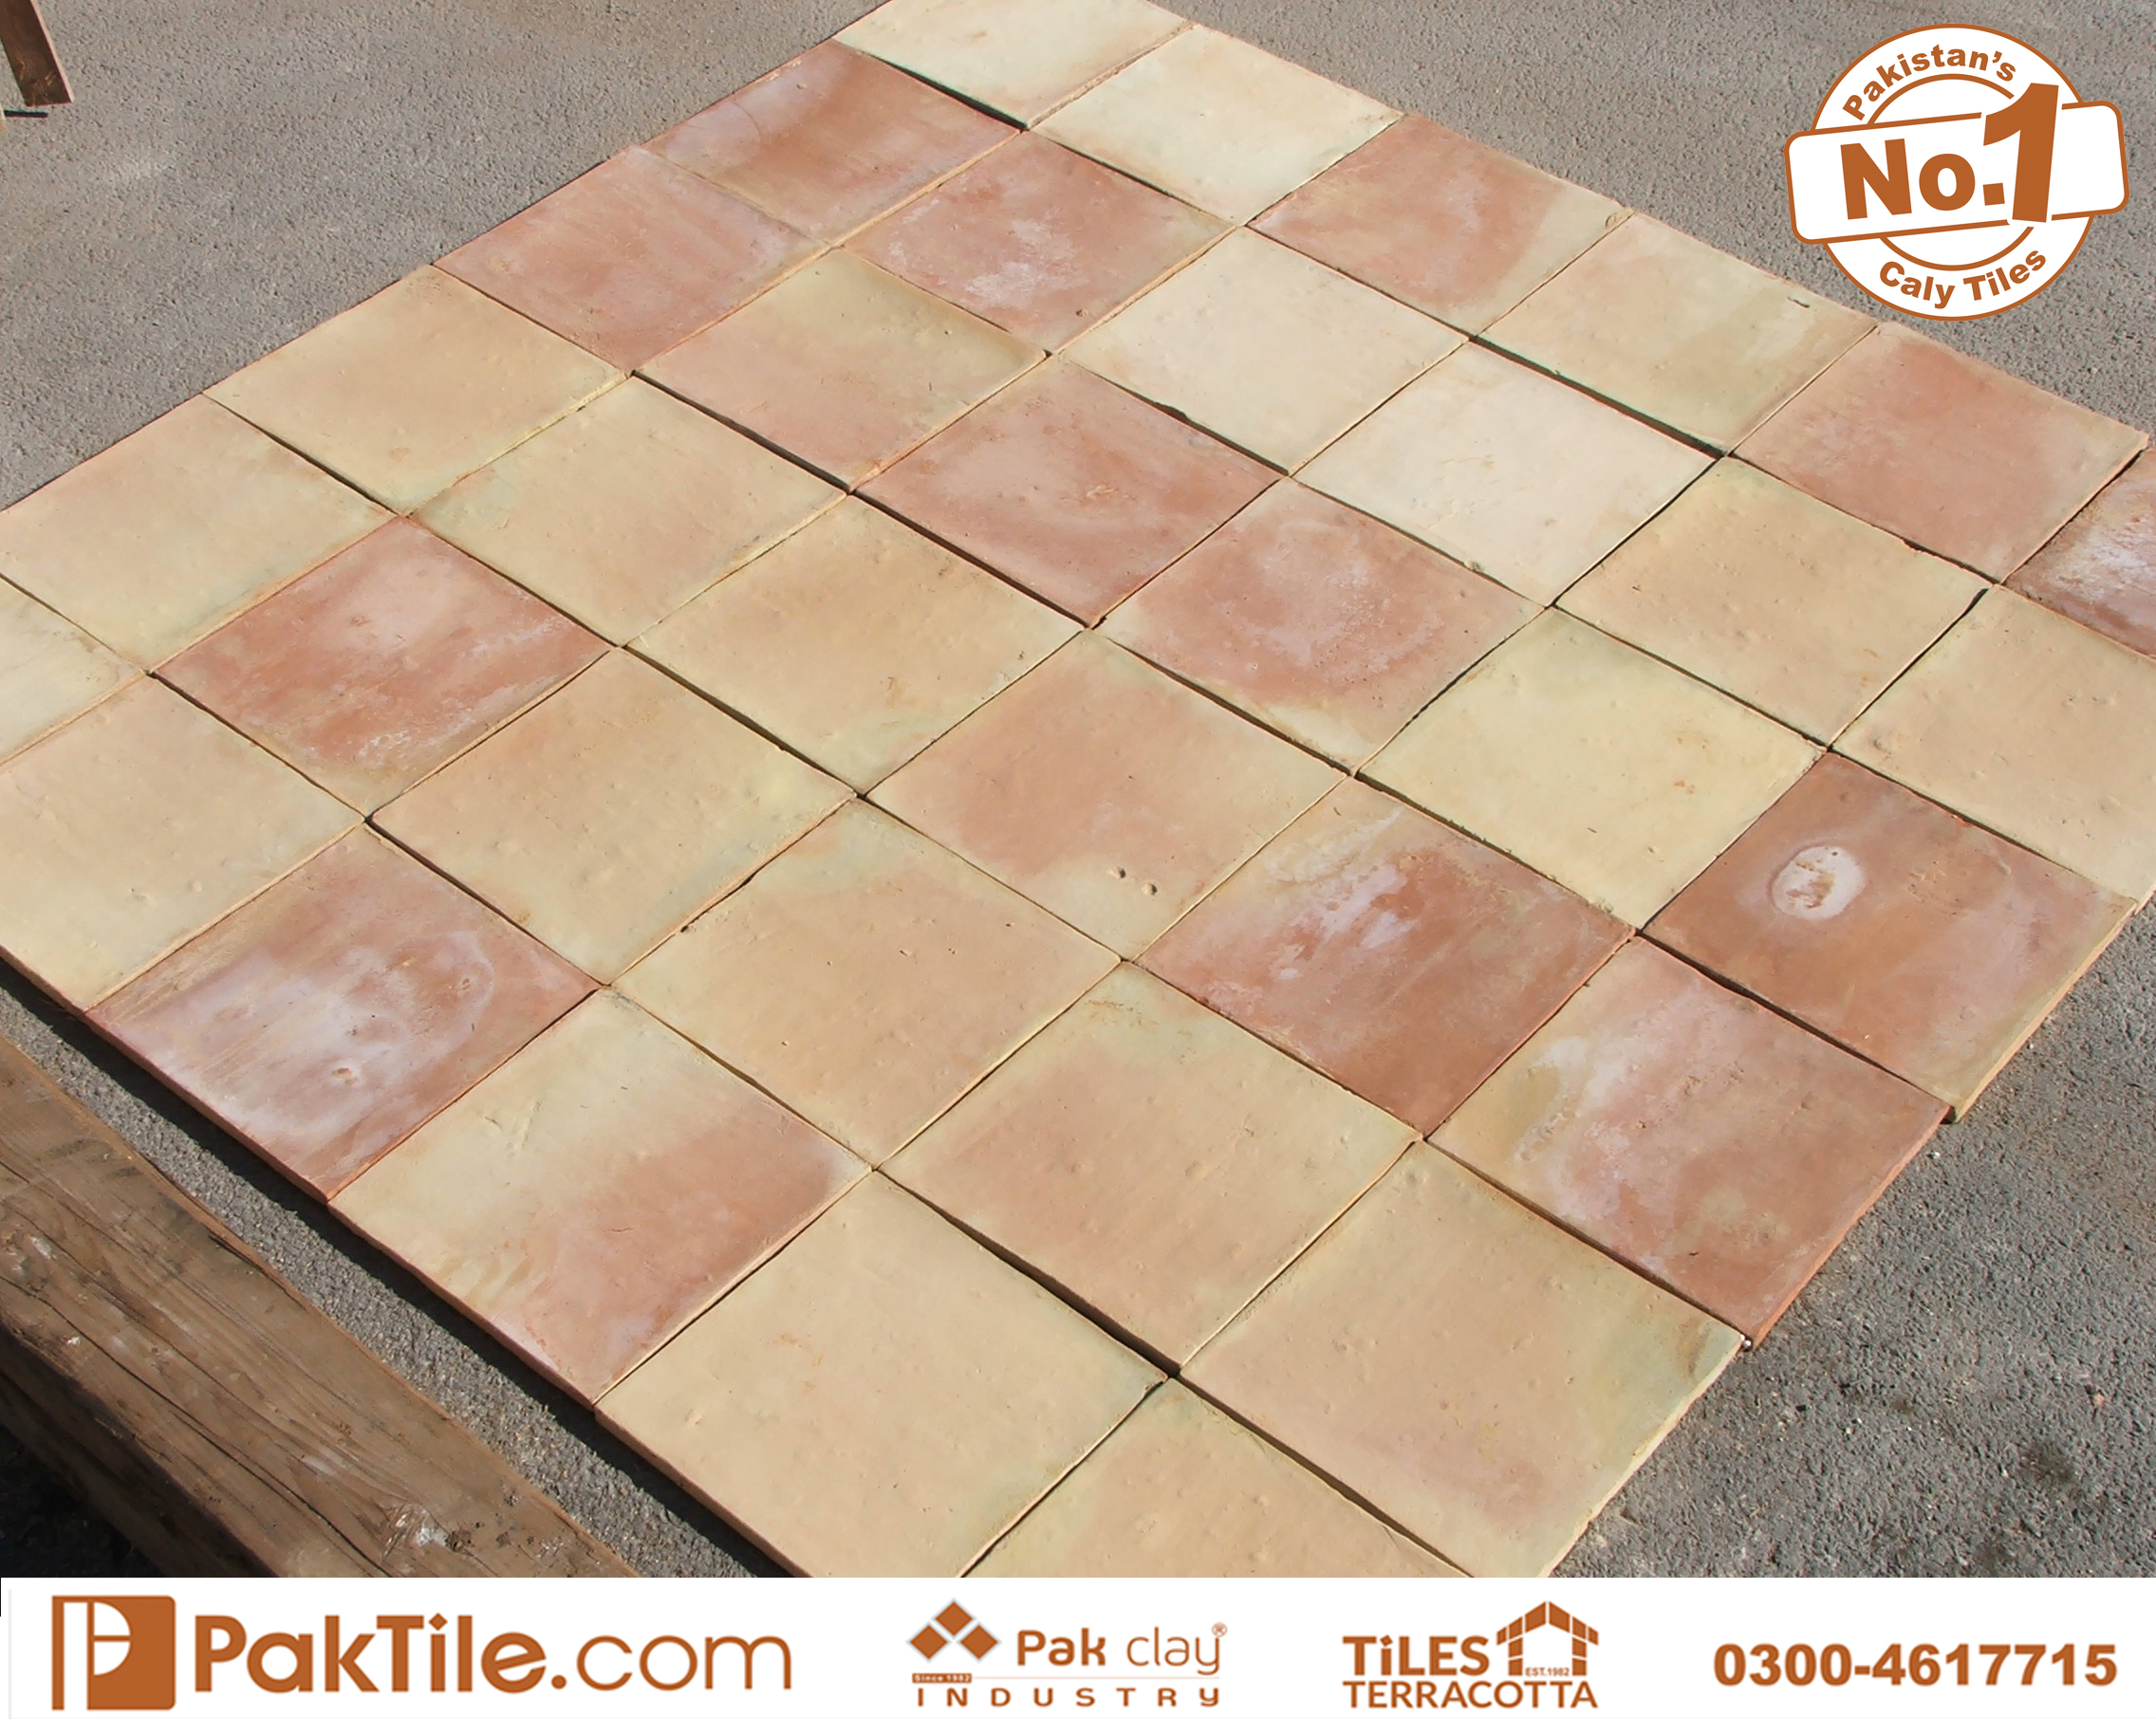 2 Pak Clay Square Shape Red Bricks Flooring Tiles Design and Price in Lahore Images